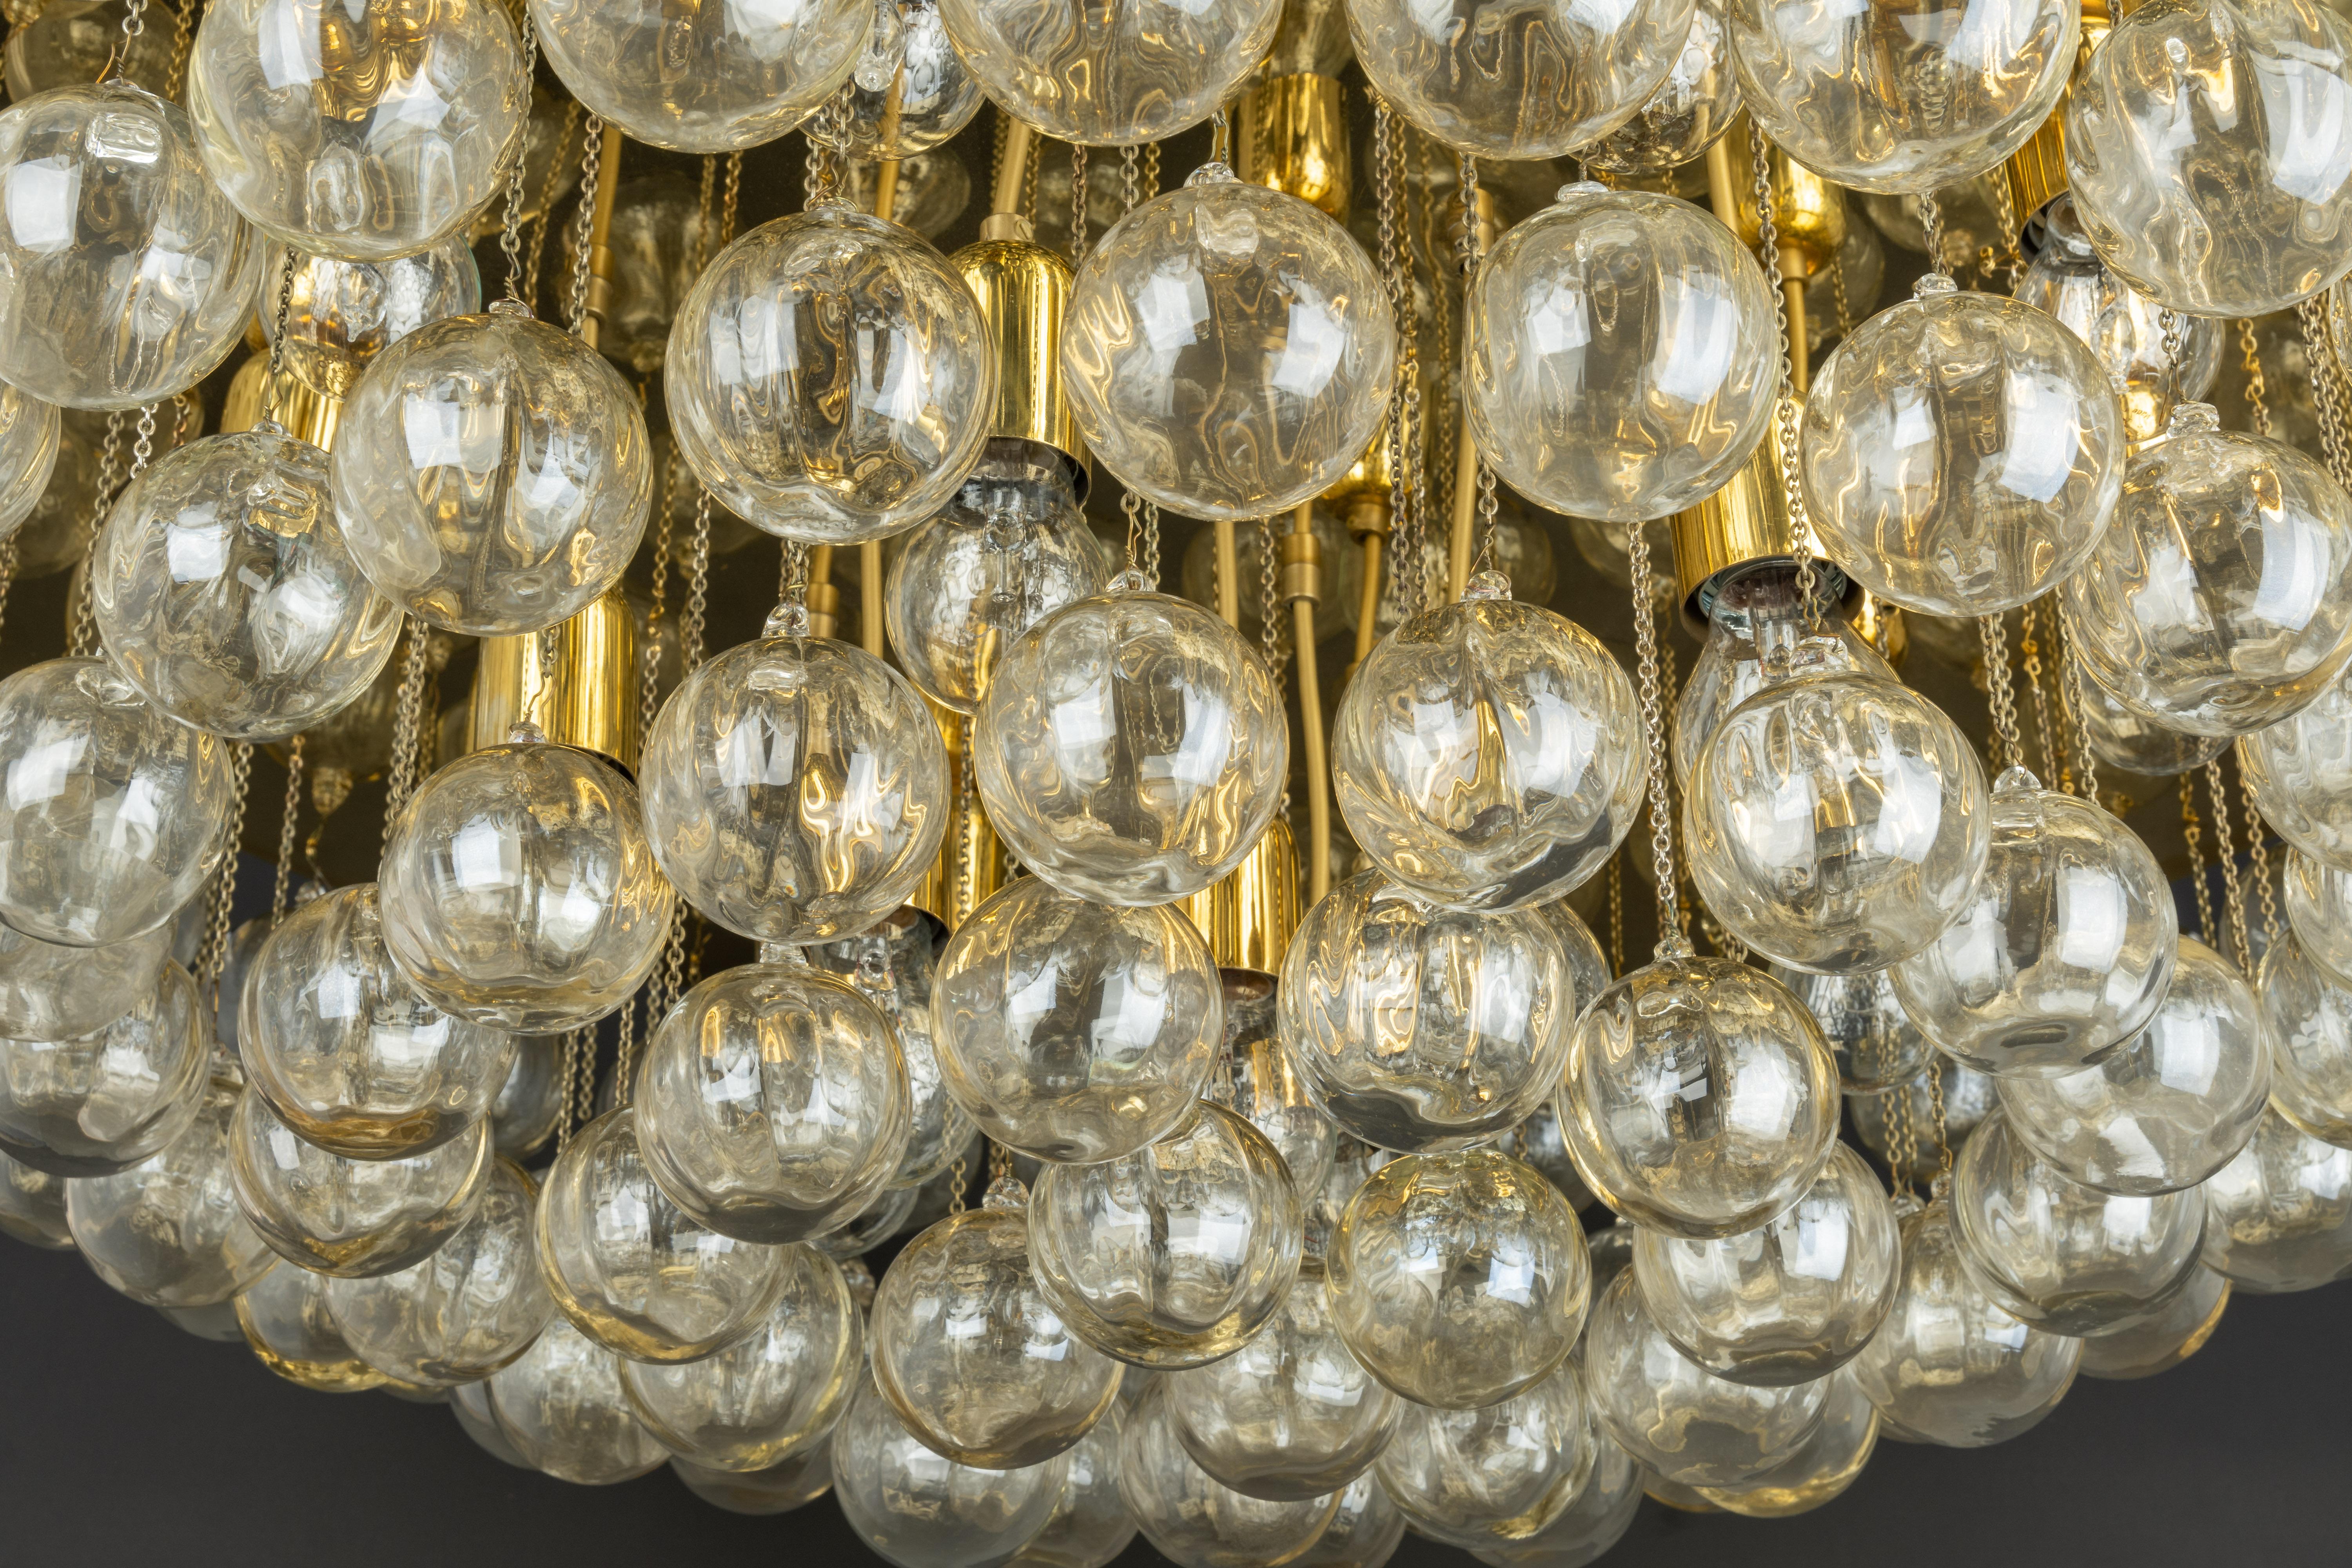 1 of 2 Extra Large Murano Glass Chandelier, Christoph Palme, Germany, 1970s For Sale 7